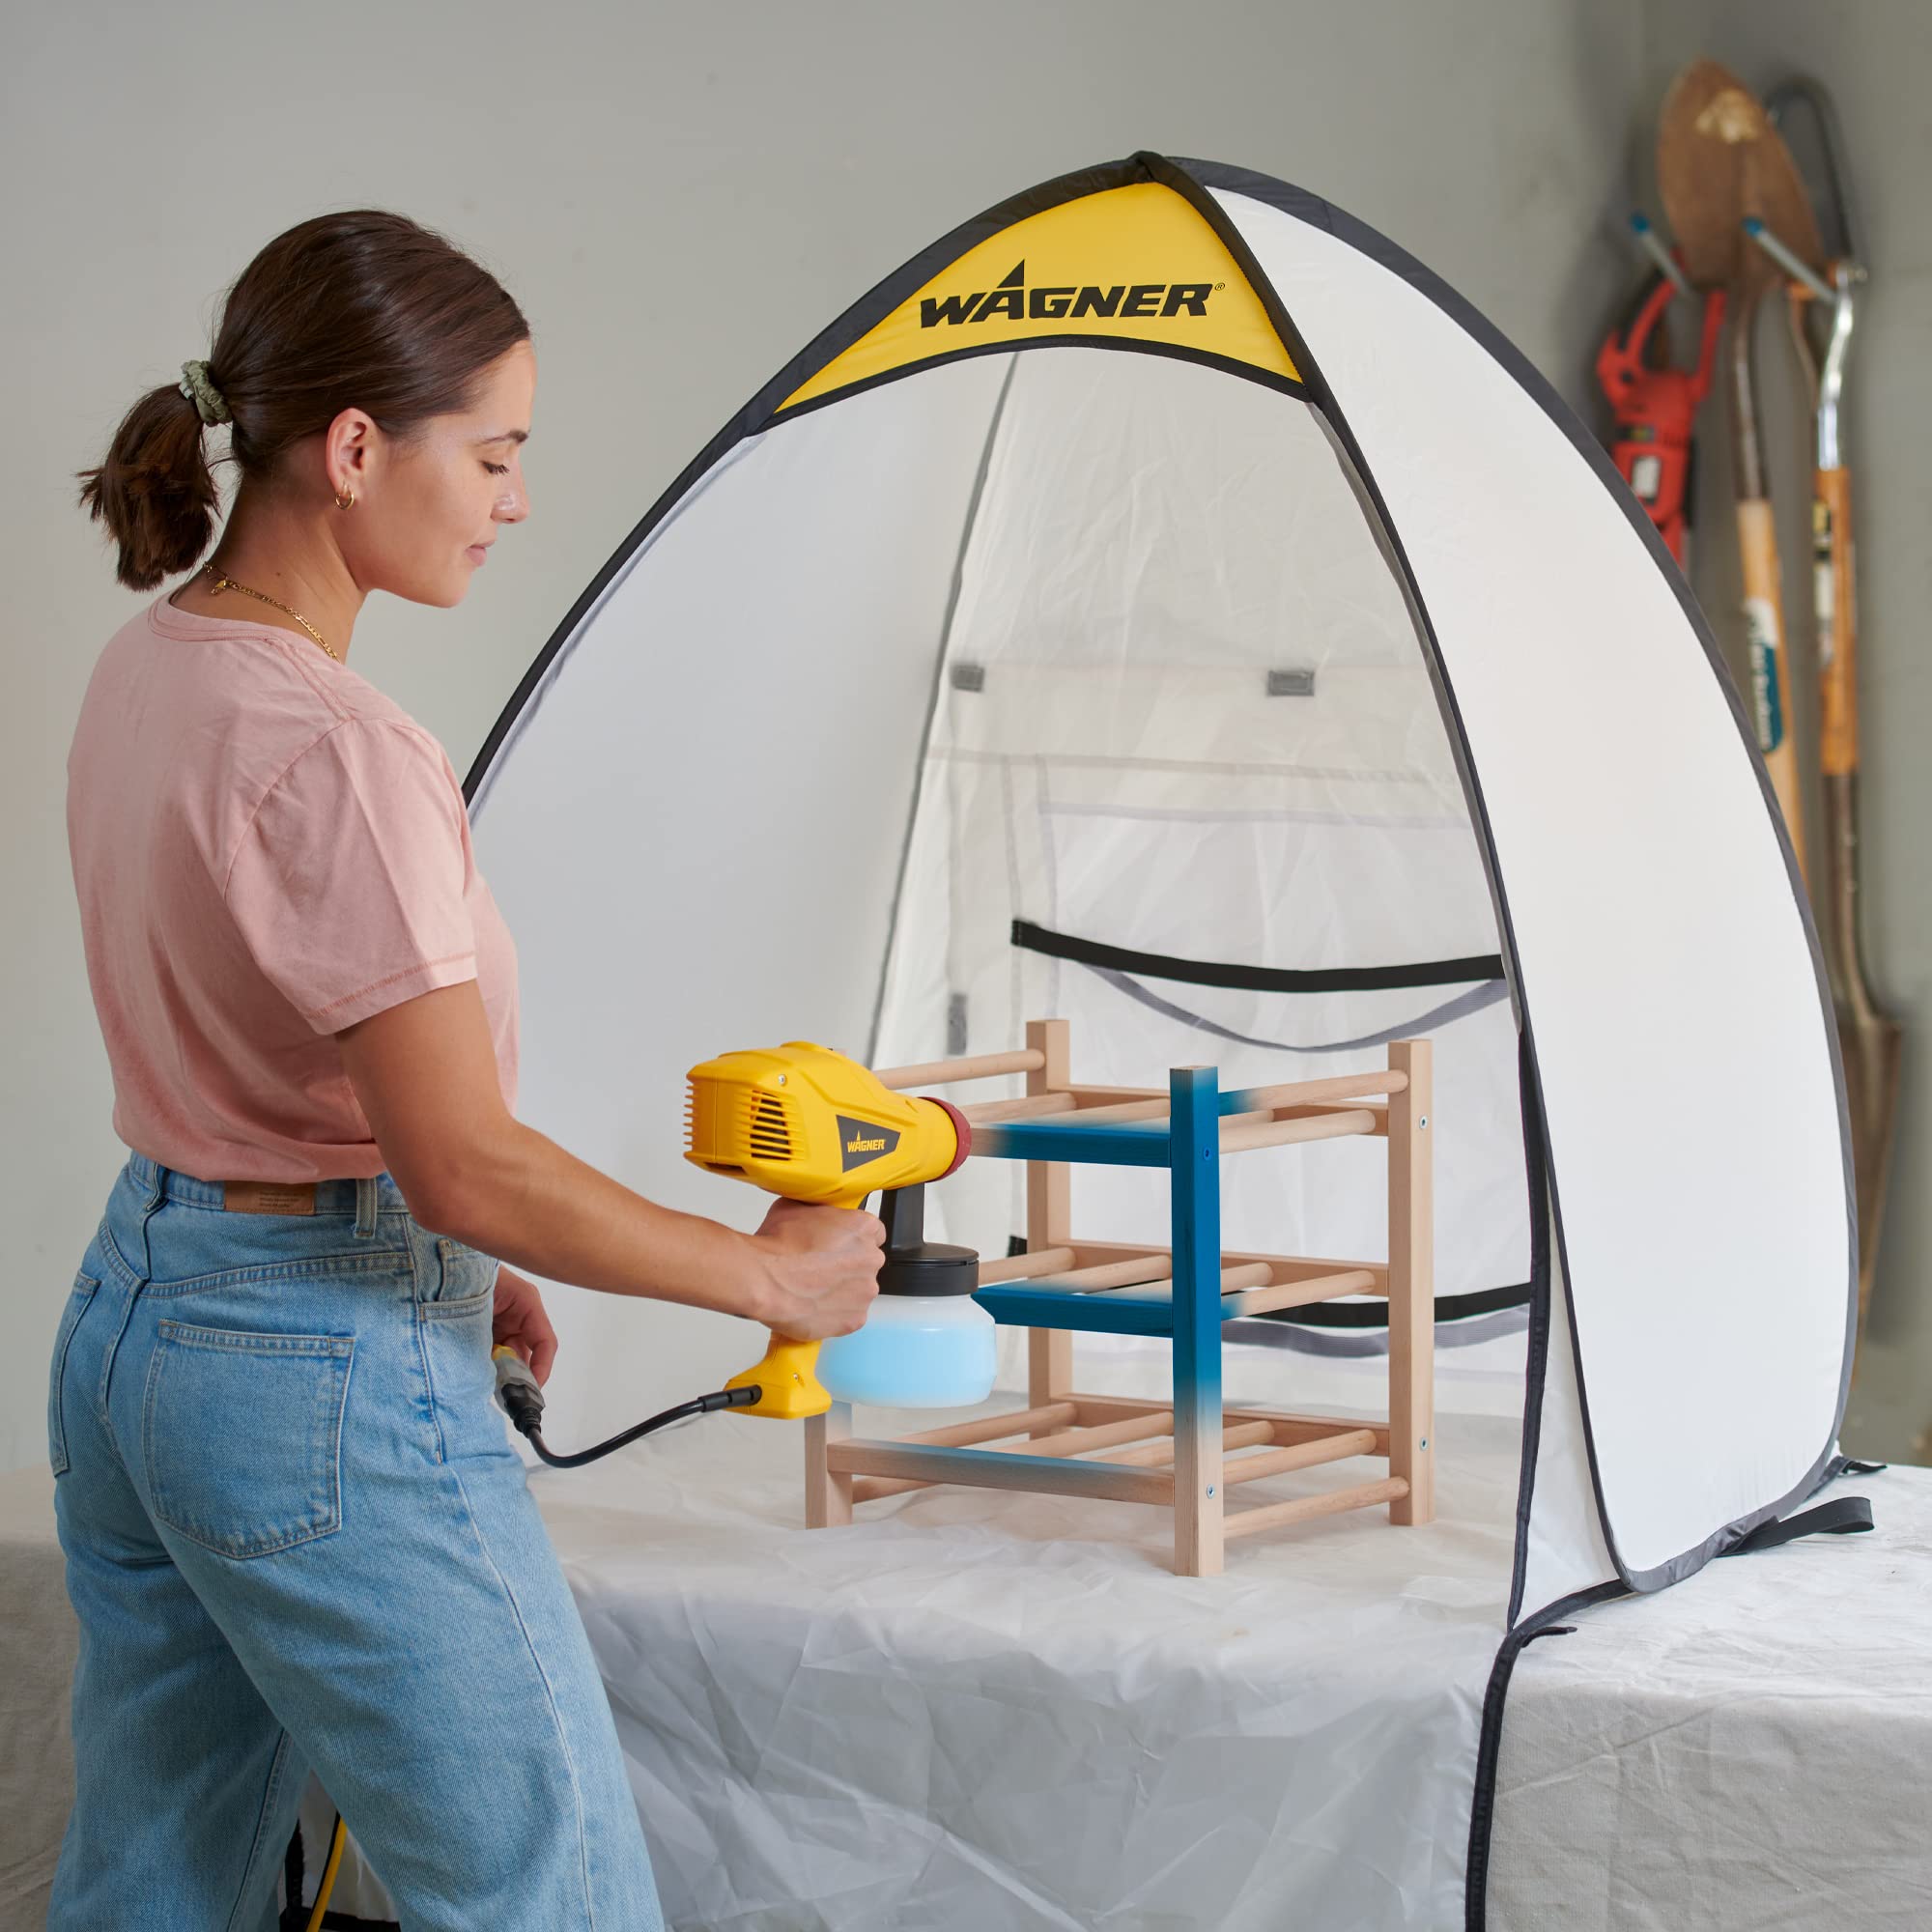 Wagner Spraytech C900051 HomeRight Small Spray Shelter Portable Paint Booth for DIY Spray Painting, Hobby Paint Booth Tool Painting Station, Spray Paint Tent